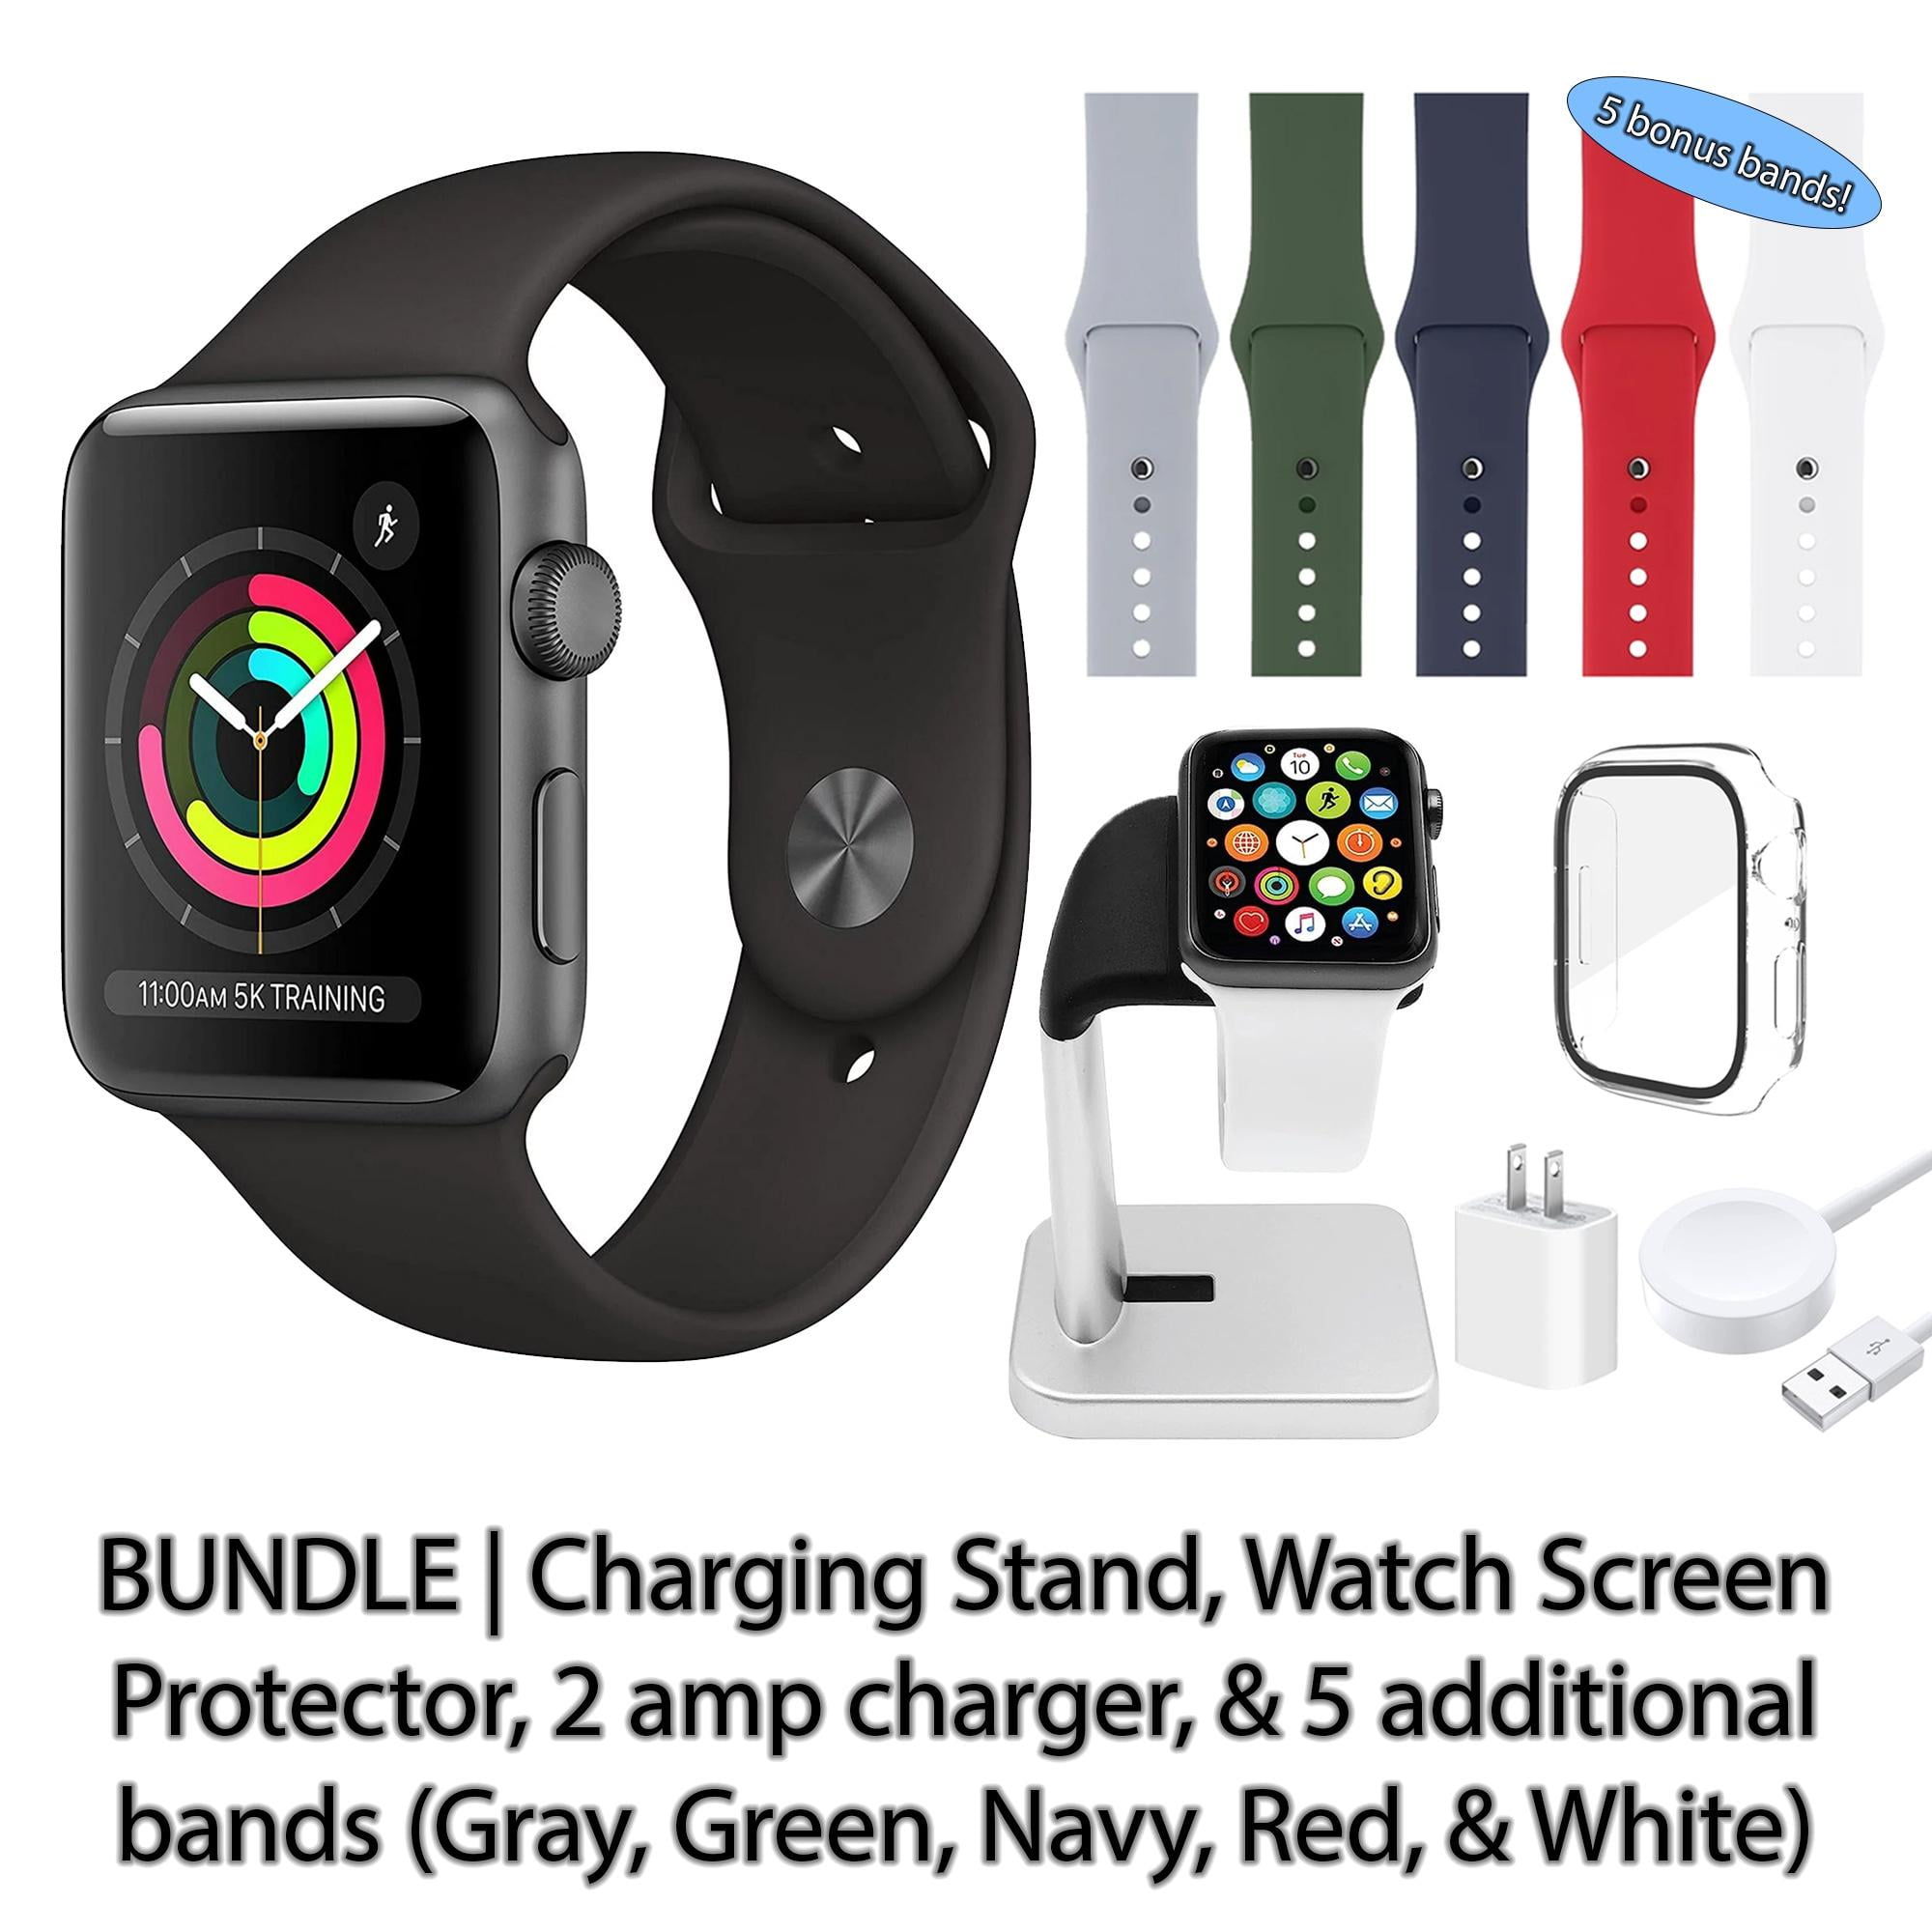 Restored Apple Watch Series 3 (GPS + Cellular, 38MM) Space Gray Aluminum  Case with Black Sport Band 5 Bonus Bands, Charging Stand, Screen Protector,  